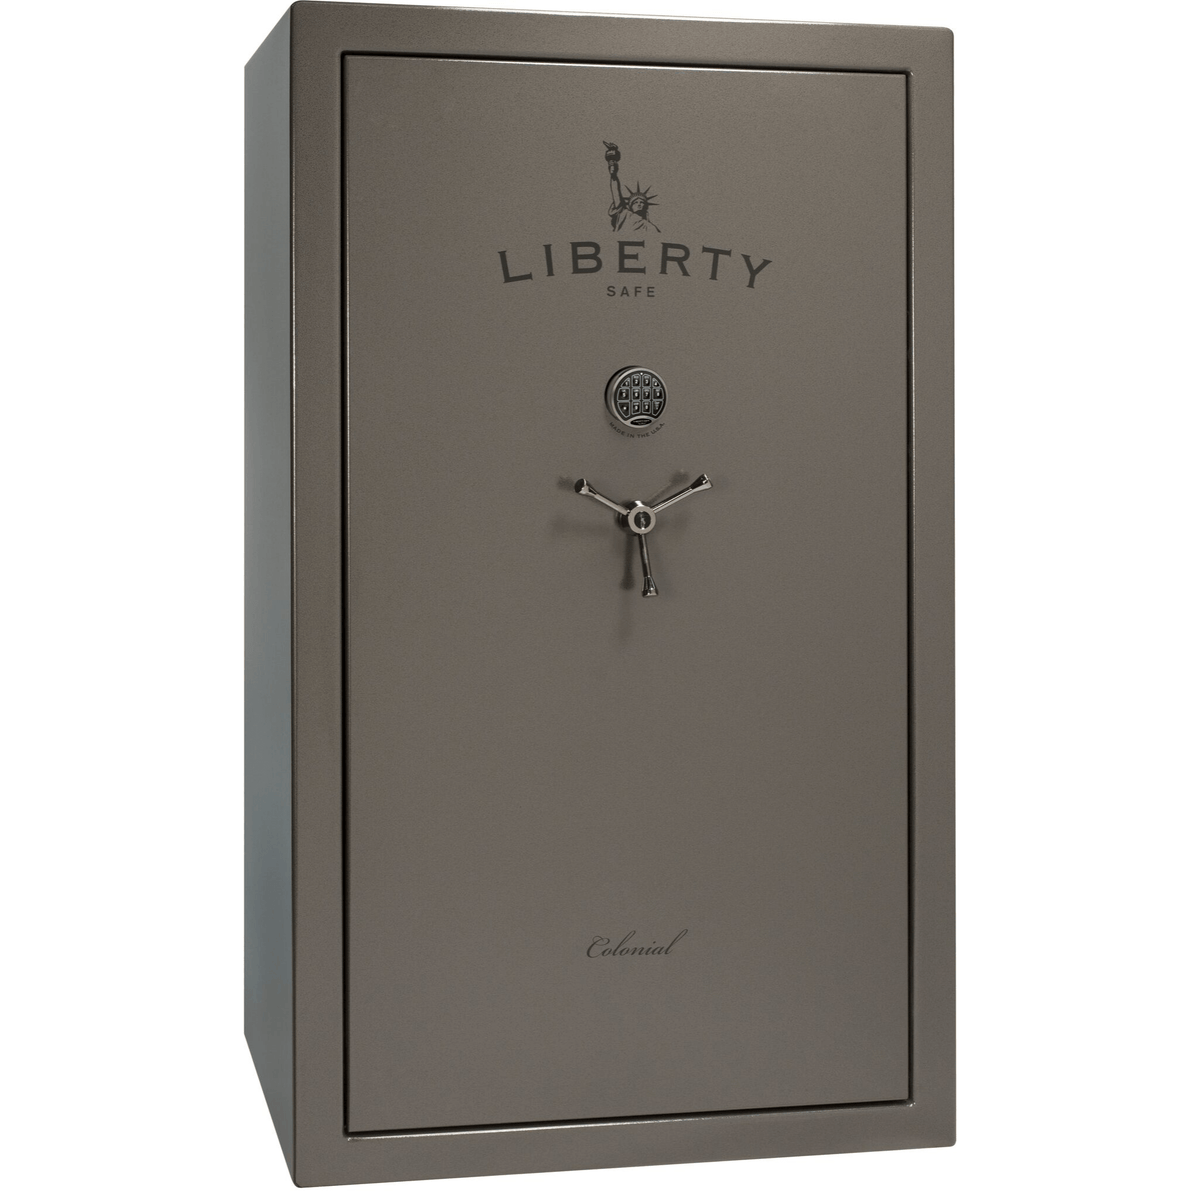 Liberty Colonial 50 Safe in Gray Marble with Black Chrome Electronic Lock.